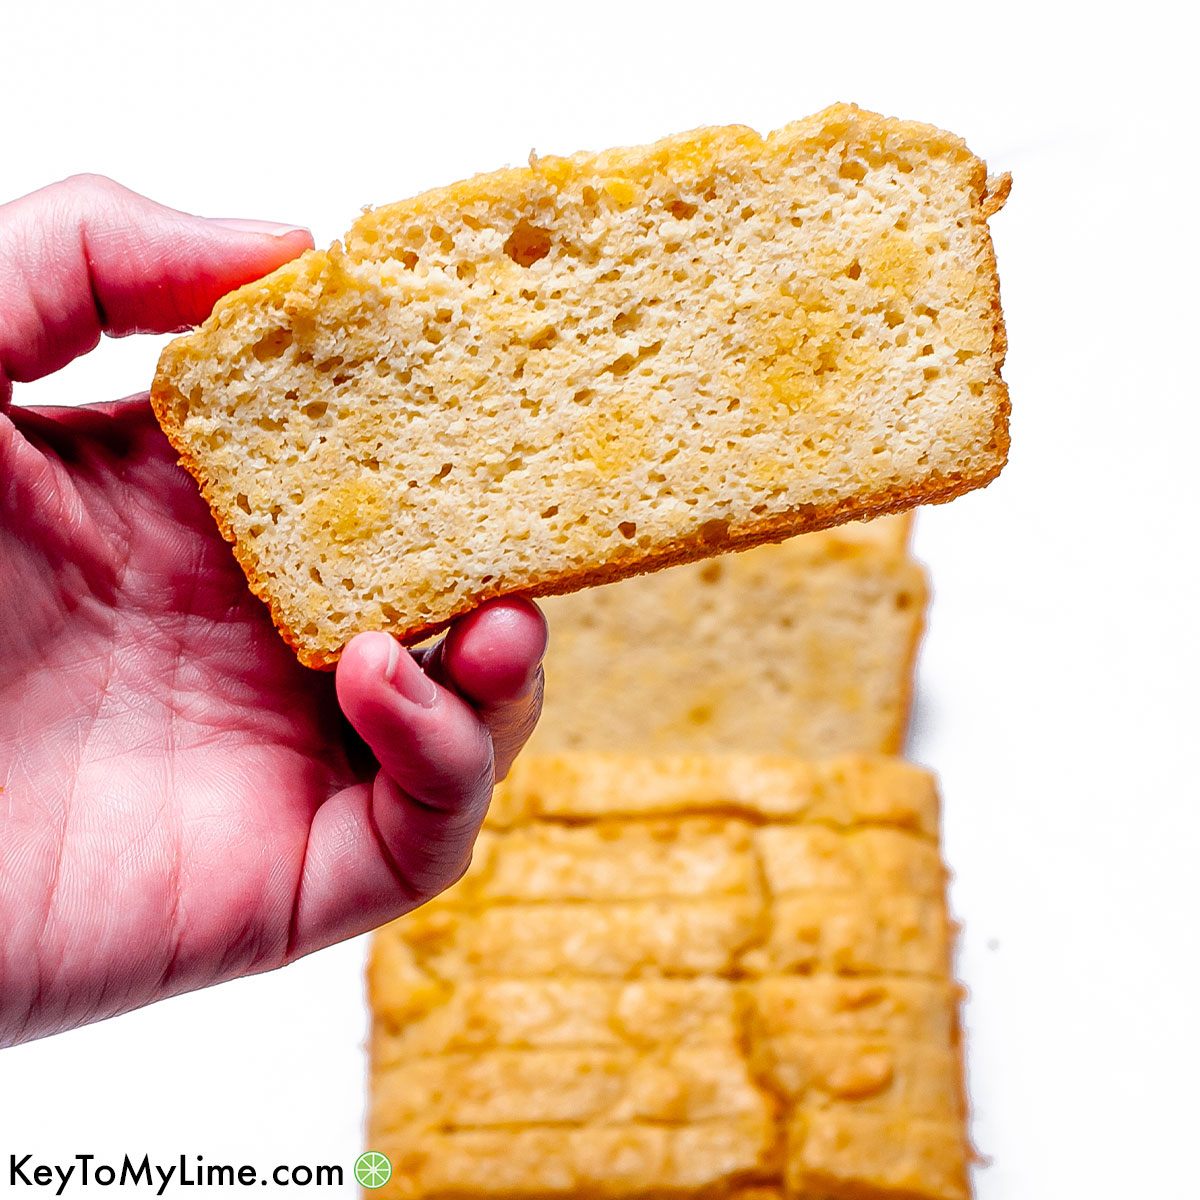 A hand holding a slice of keto bread.